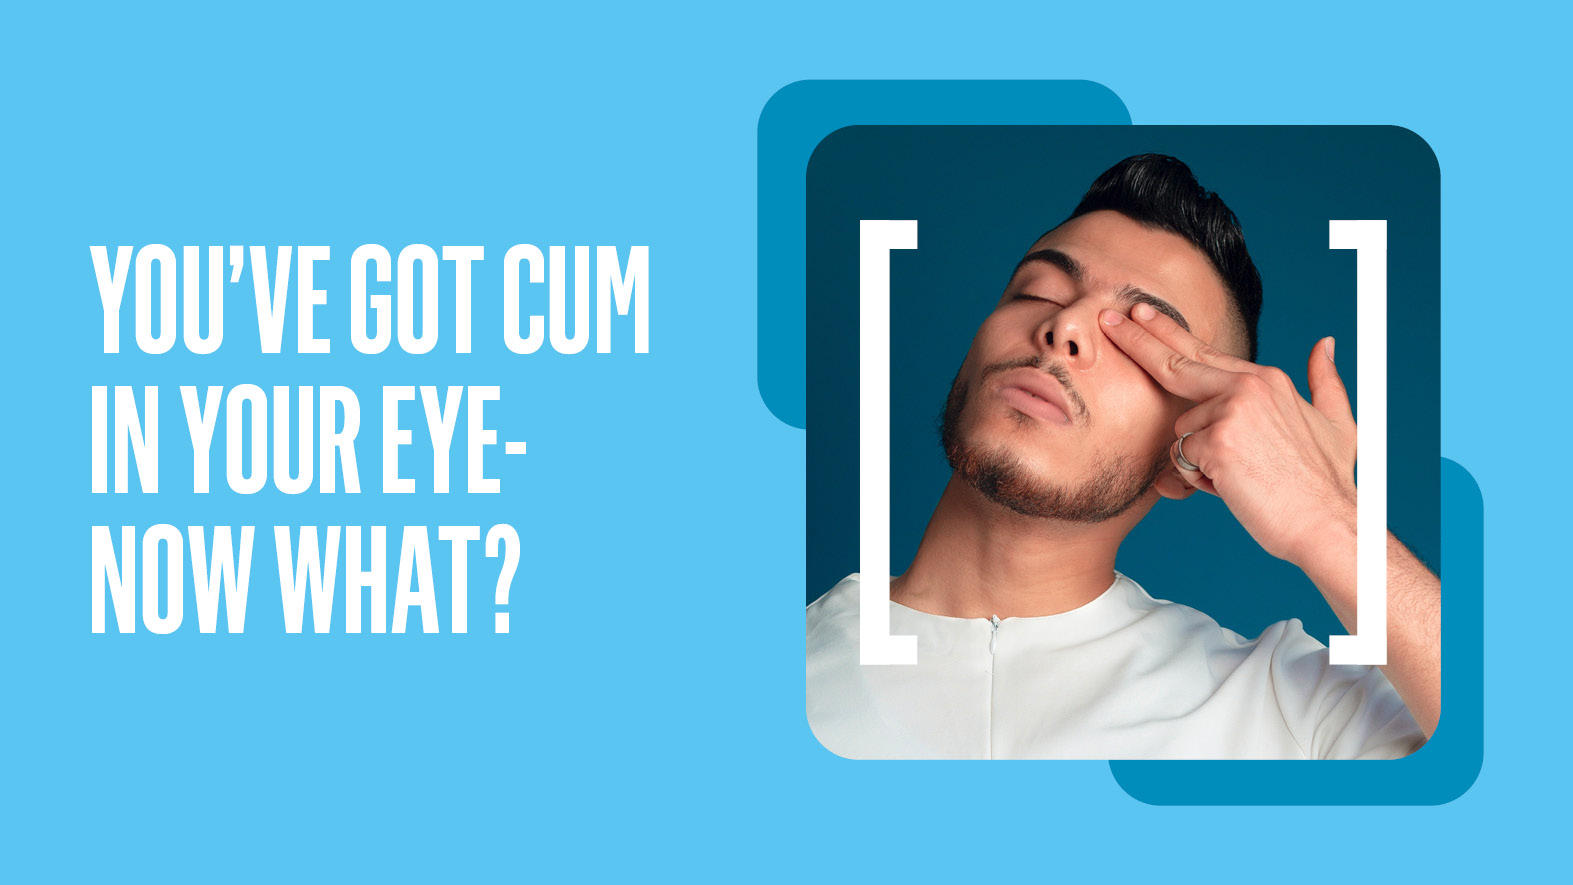 cici lo recommends jizz in the eye pic